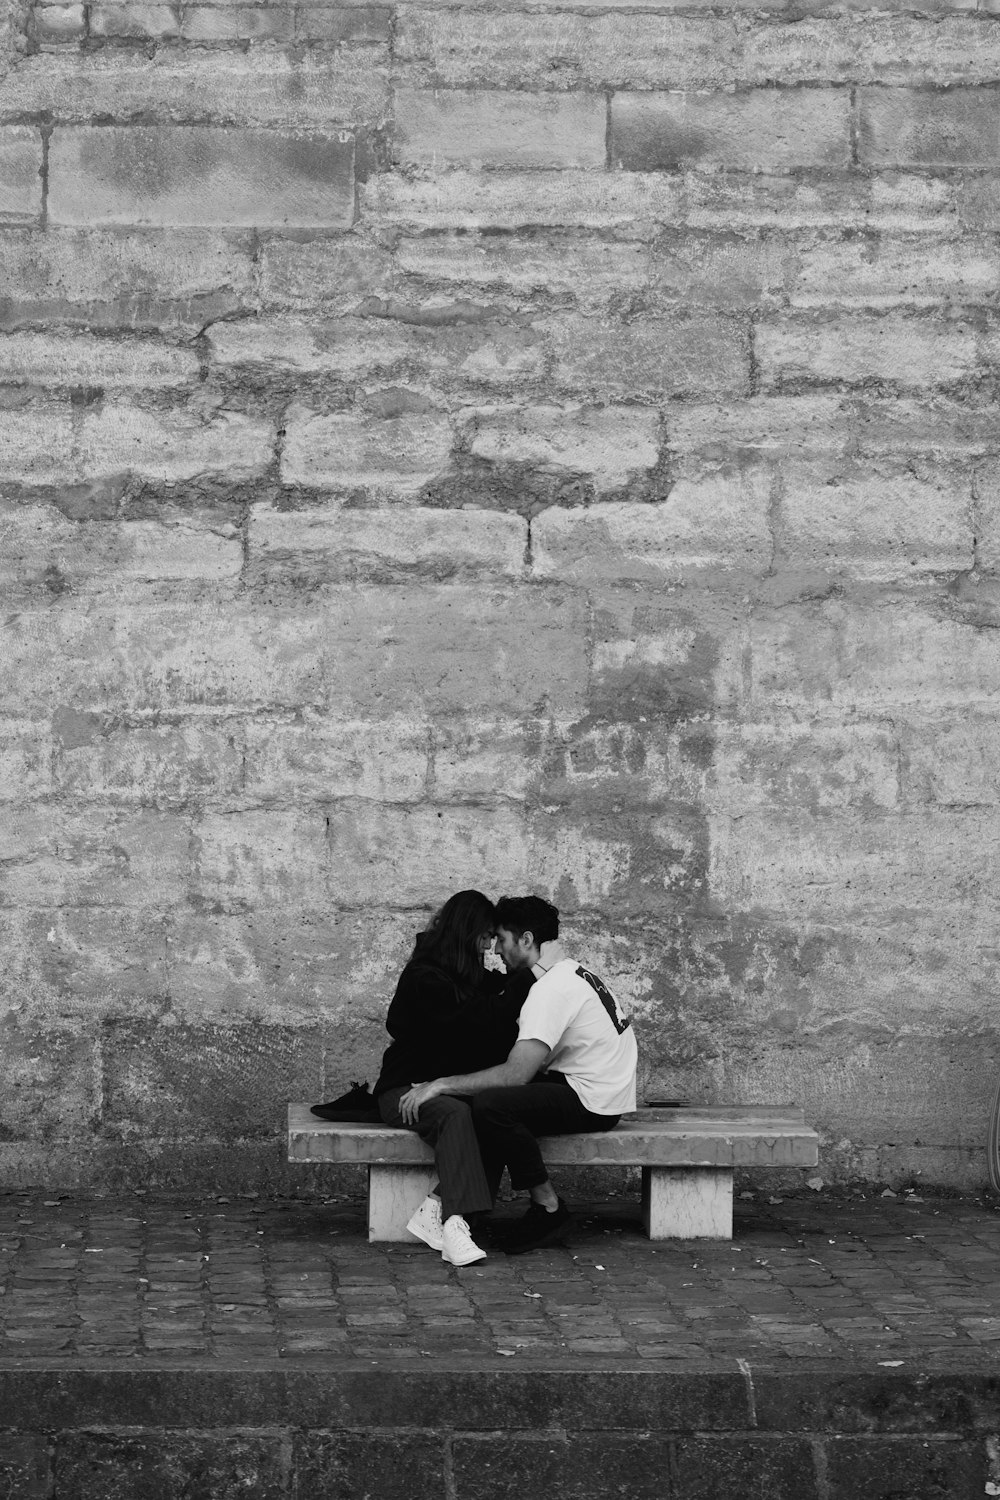 two people sitting on a bench in front of a brick wall